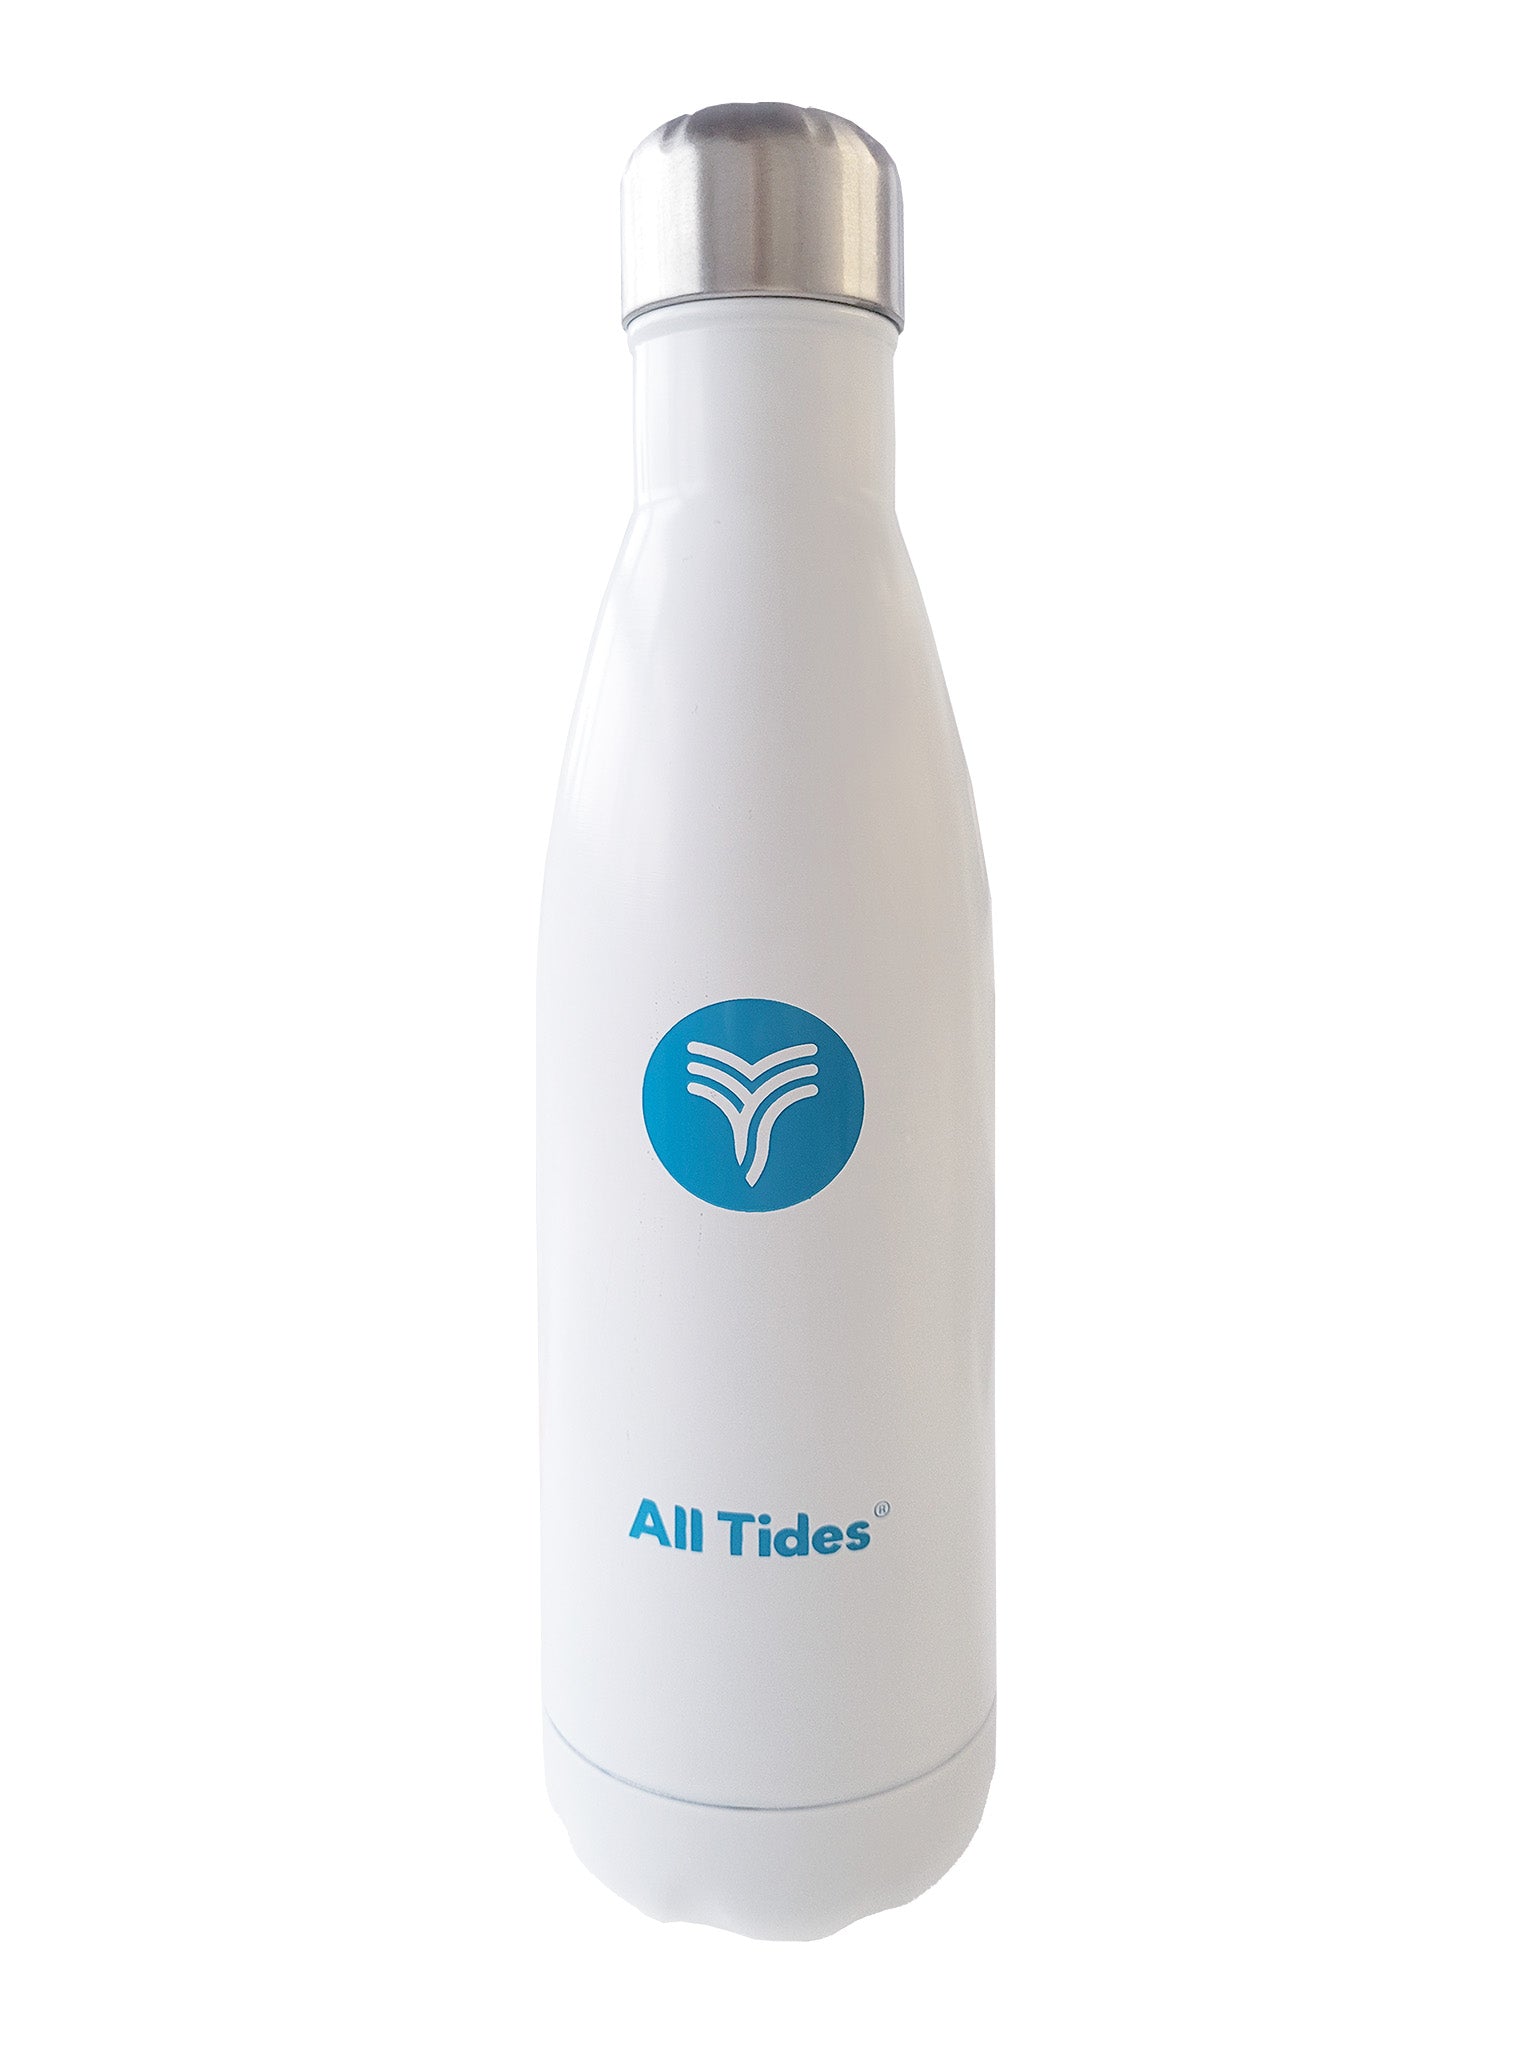 Stainless Steel Water Bottle - All Tides